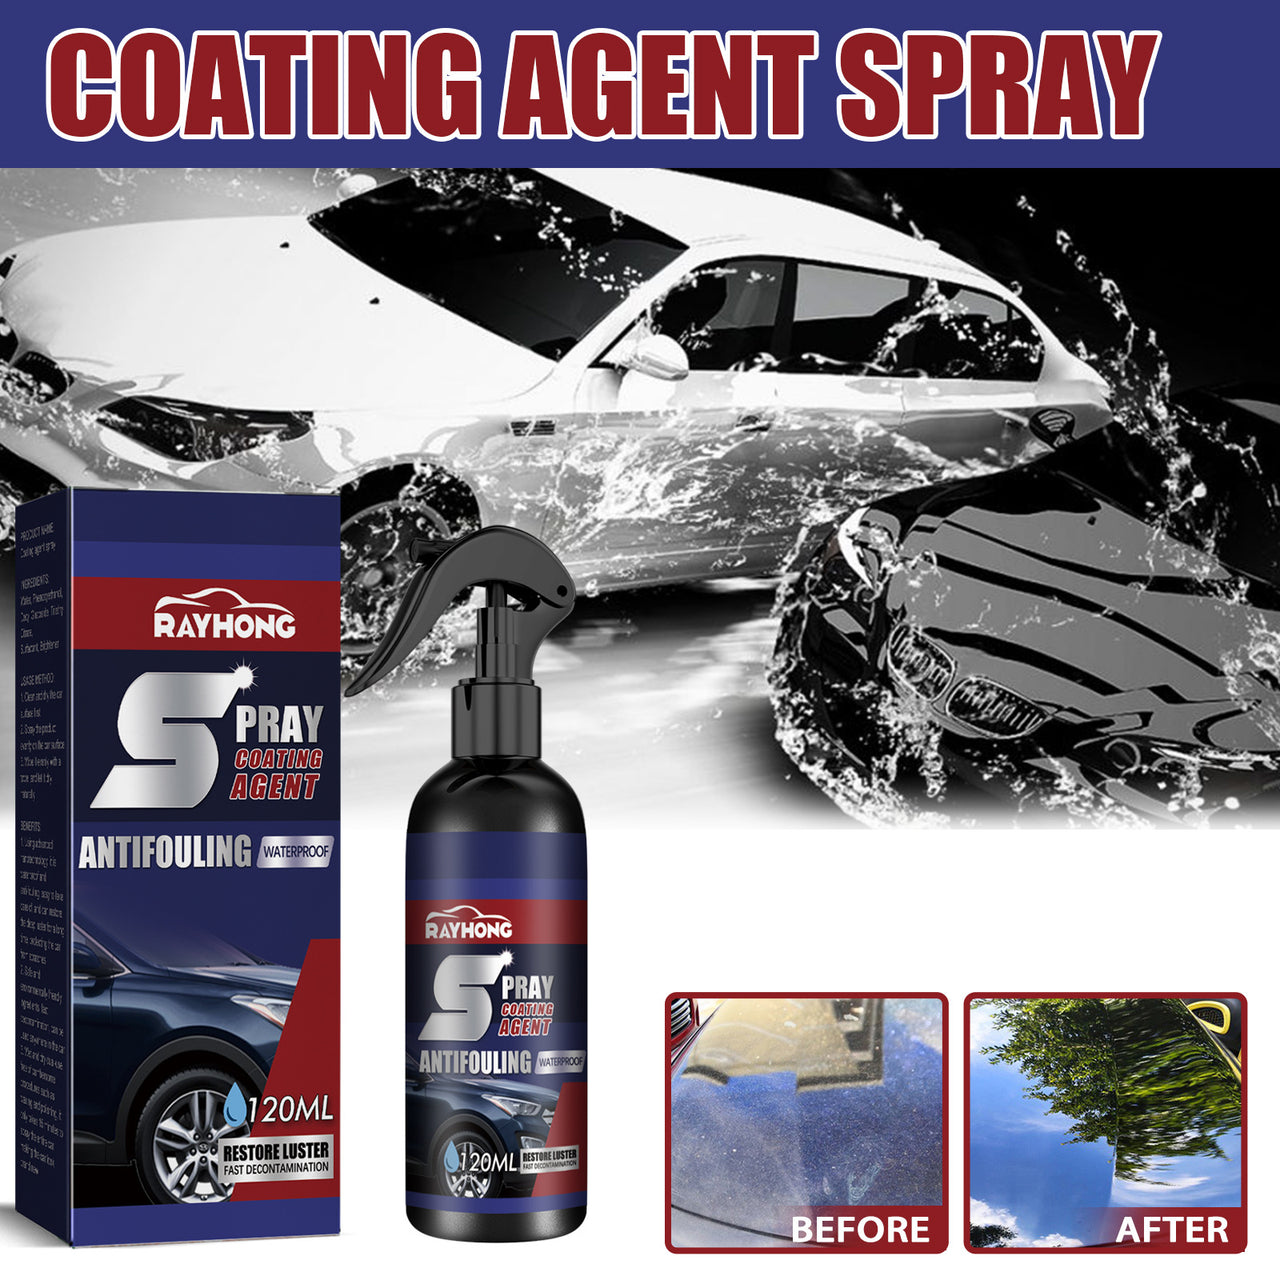 Spray Coating Agent for Cars